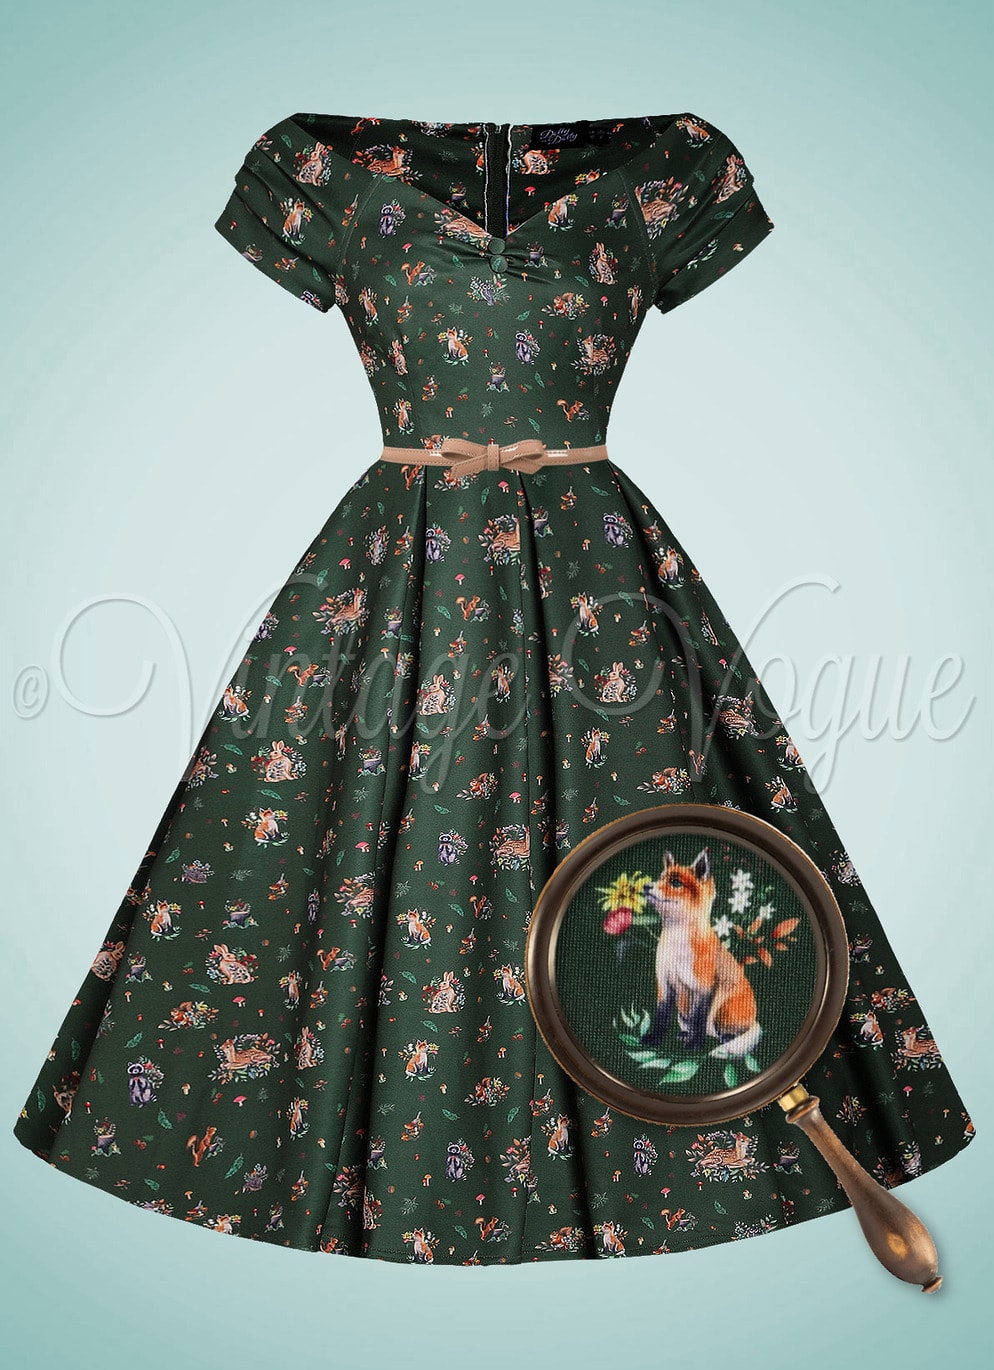 Dolly and Dotty 50's Retro Vintage Swing Herbst Fuchs Kleid Lily in Dunkelgrün 50er Jahre Petticoat Damenkleid Dress Vintage Herbstkleid Fuchs Pilze Wald Igel Eulen Hirsch Muster Fairy Core